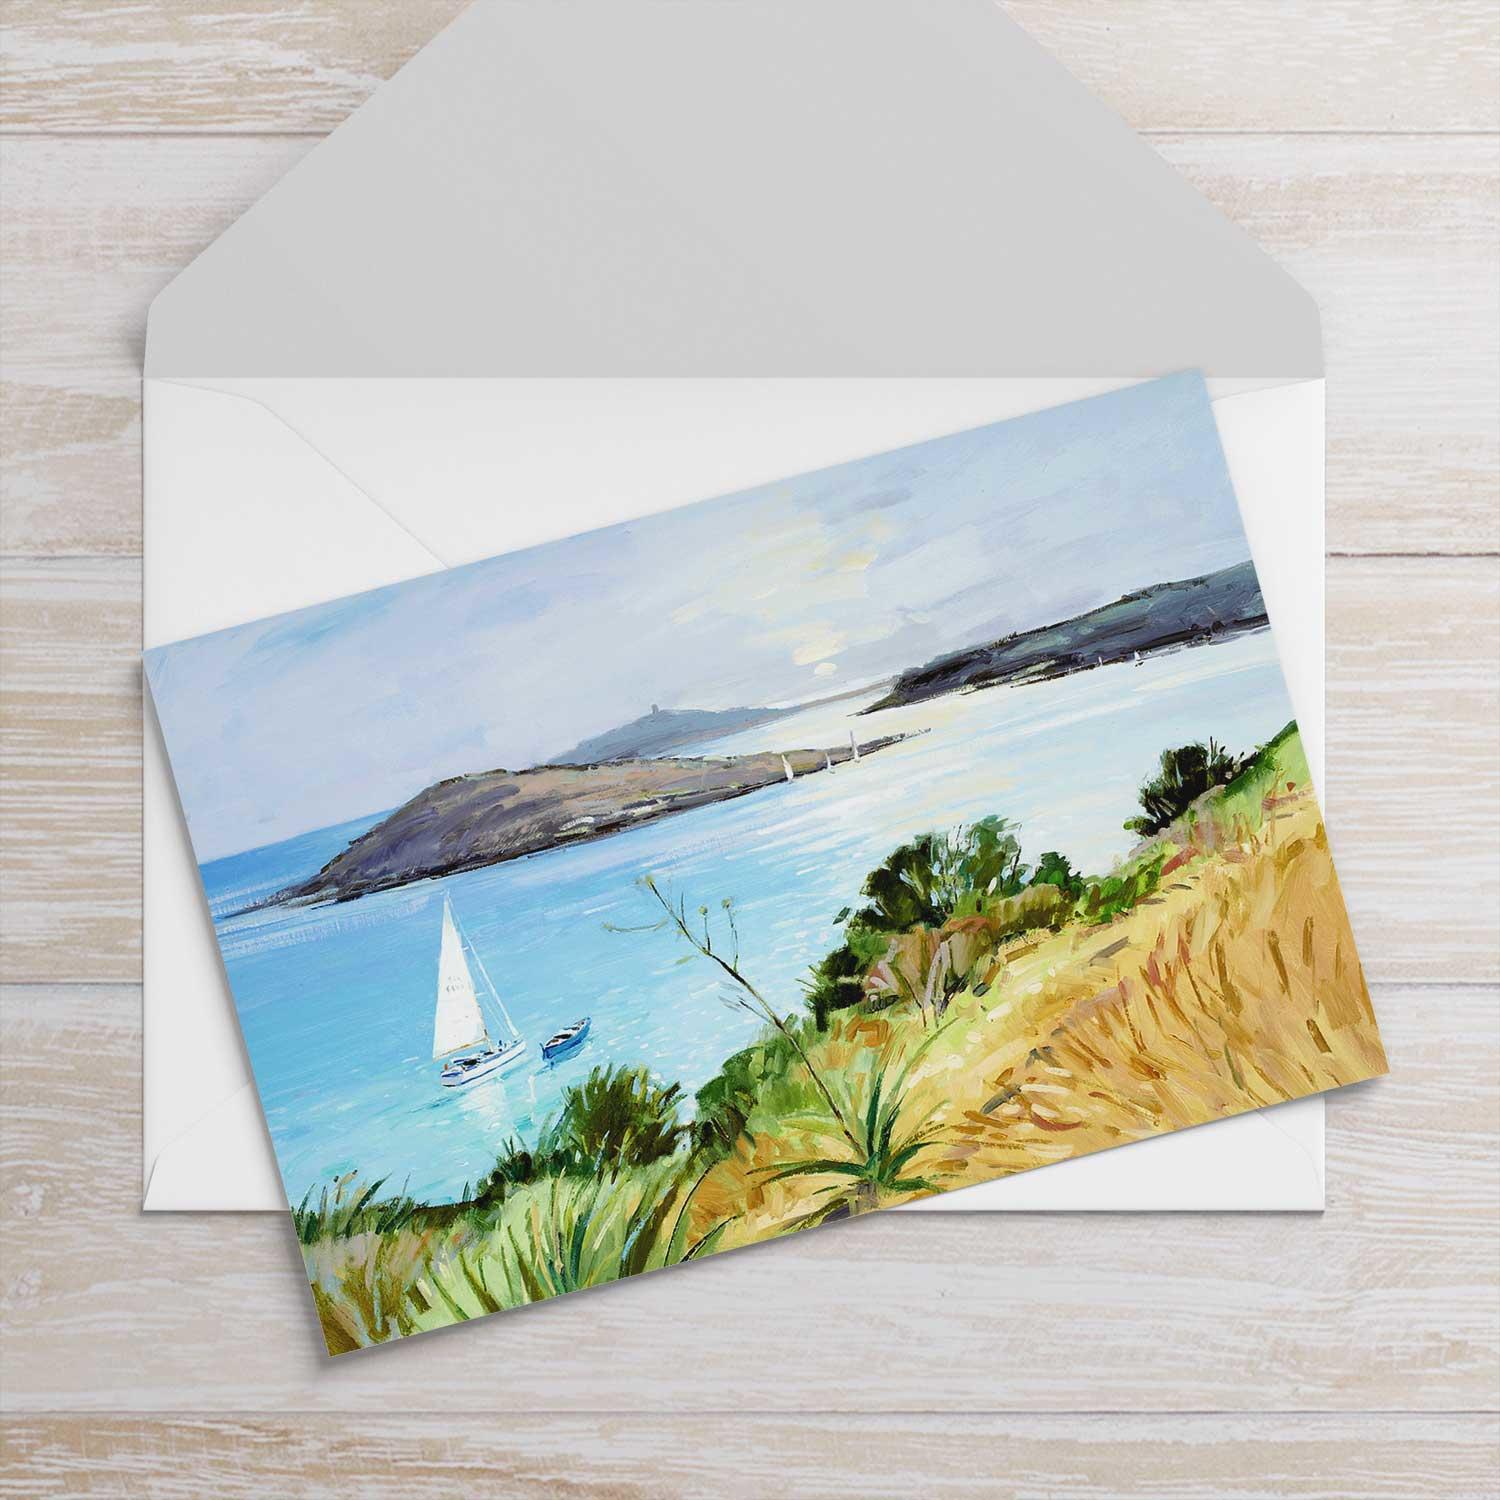 Ready to Sail Greeting Card from an original painting by artist Robert Kelsey